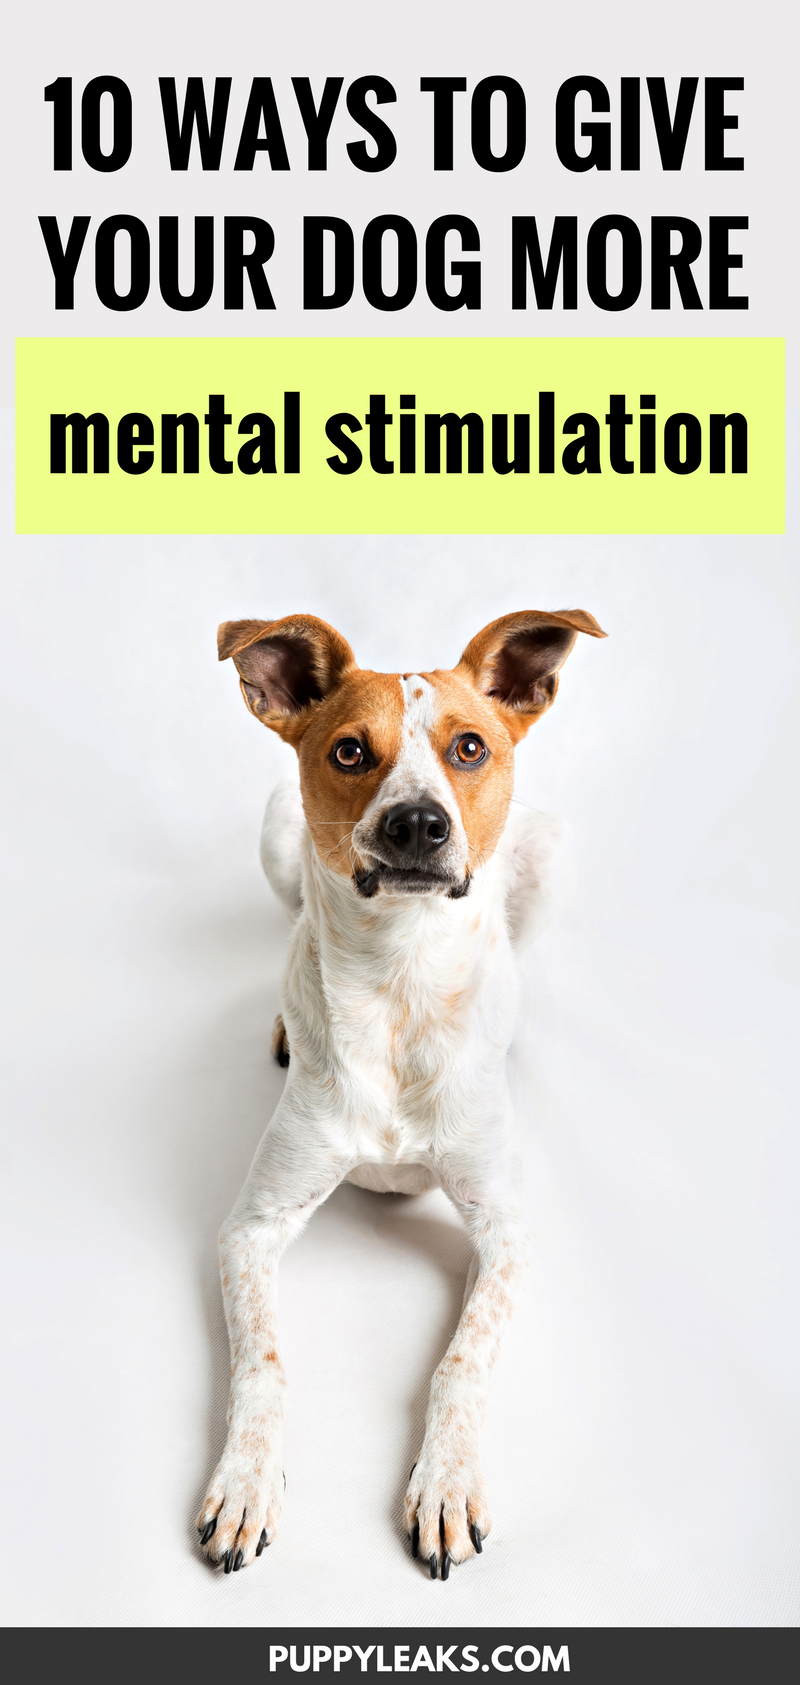 10 Ways To Give Your Dog More Mental Stimulation